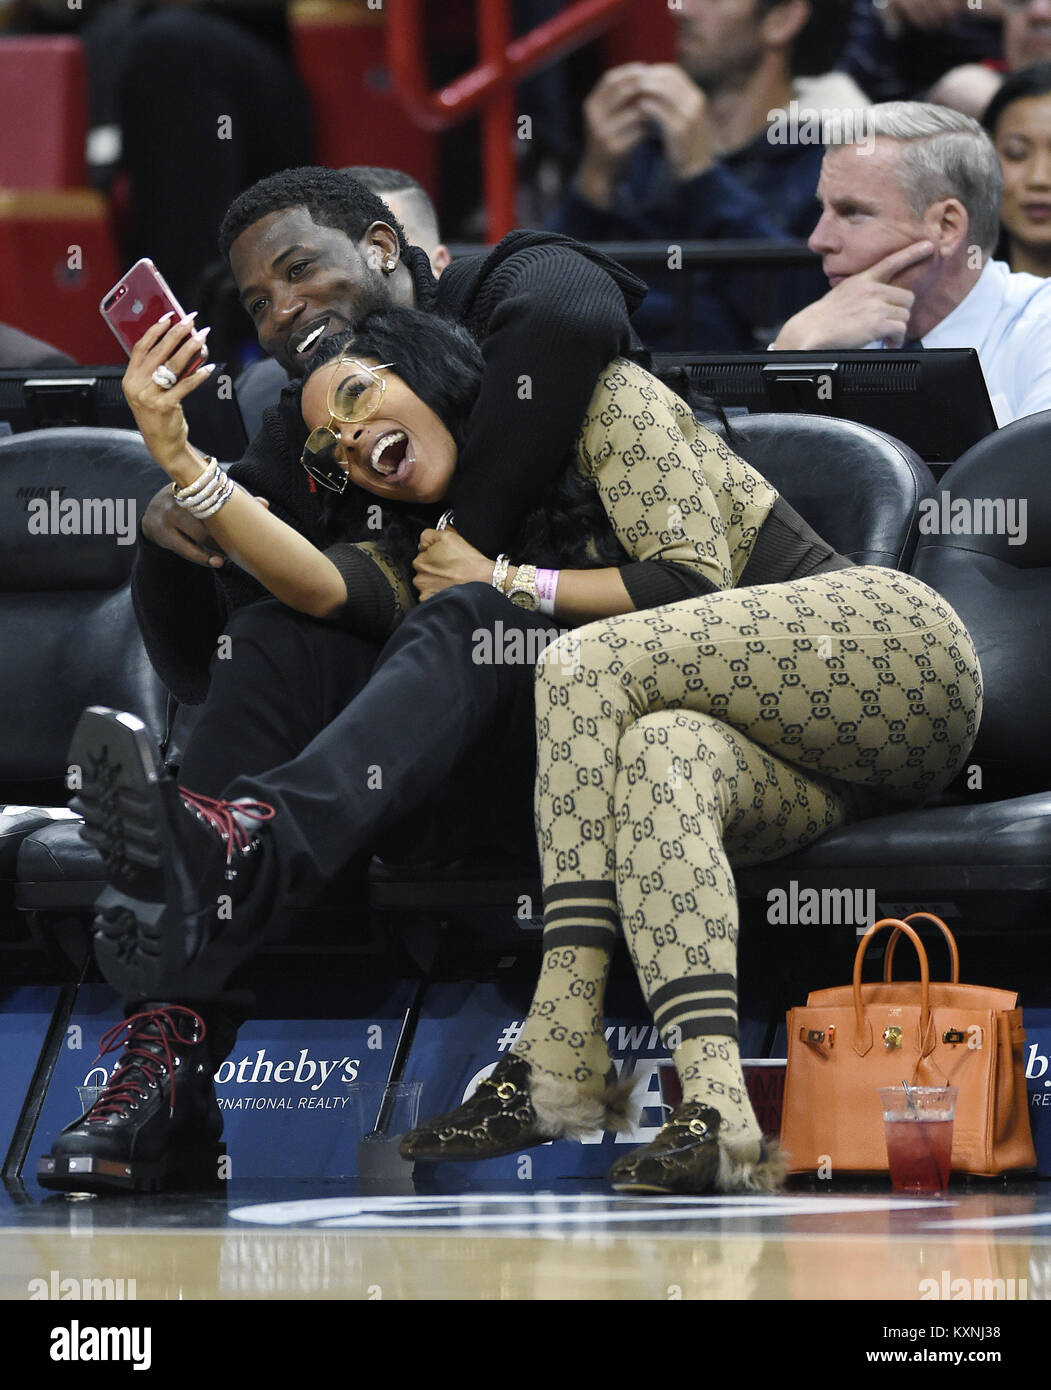 MIAMI, FL - JANUARY 5: Gucci Mane (L) and his wife Keyshia Ka'Oir (R) watch  the Miami Heat against the New York Knicks game at the America Airlines  Arena on January 5